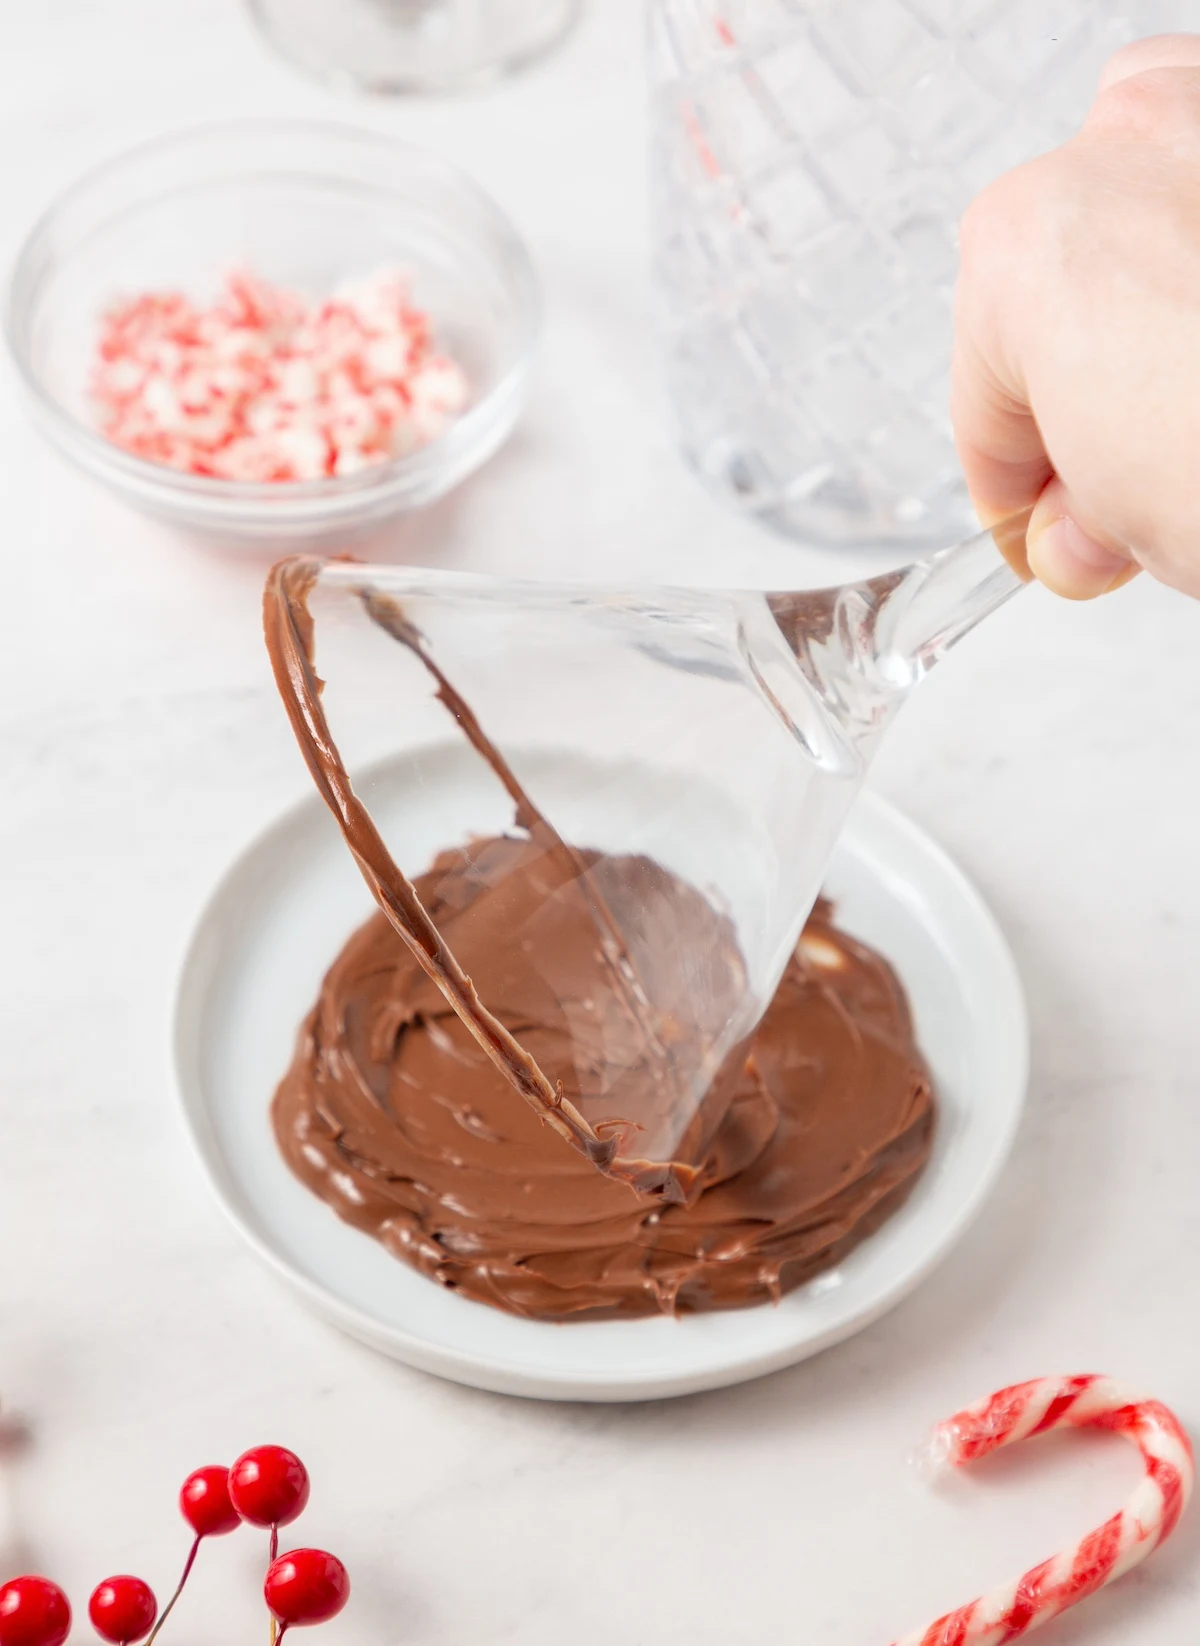 Dipping the martini glass into the melted chocolate